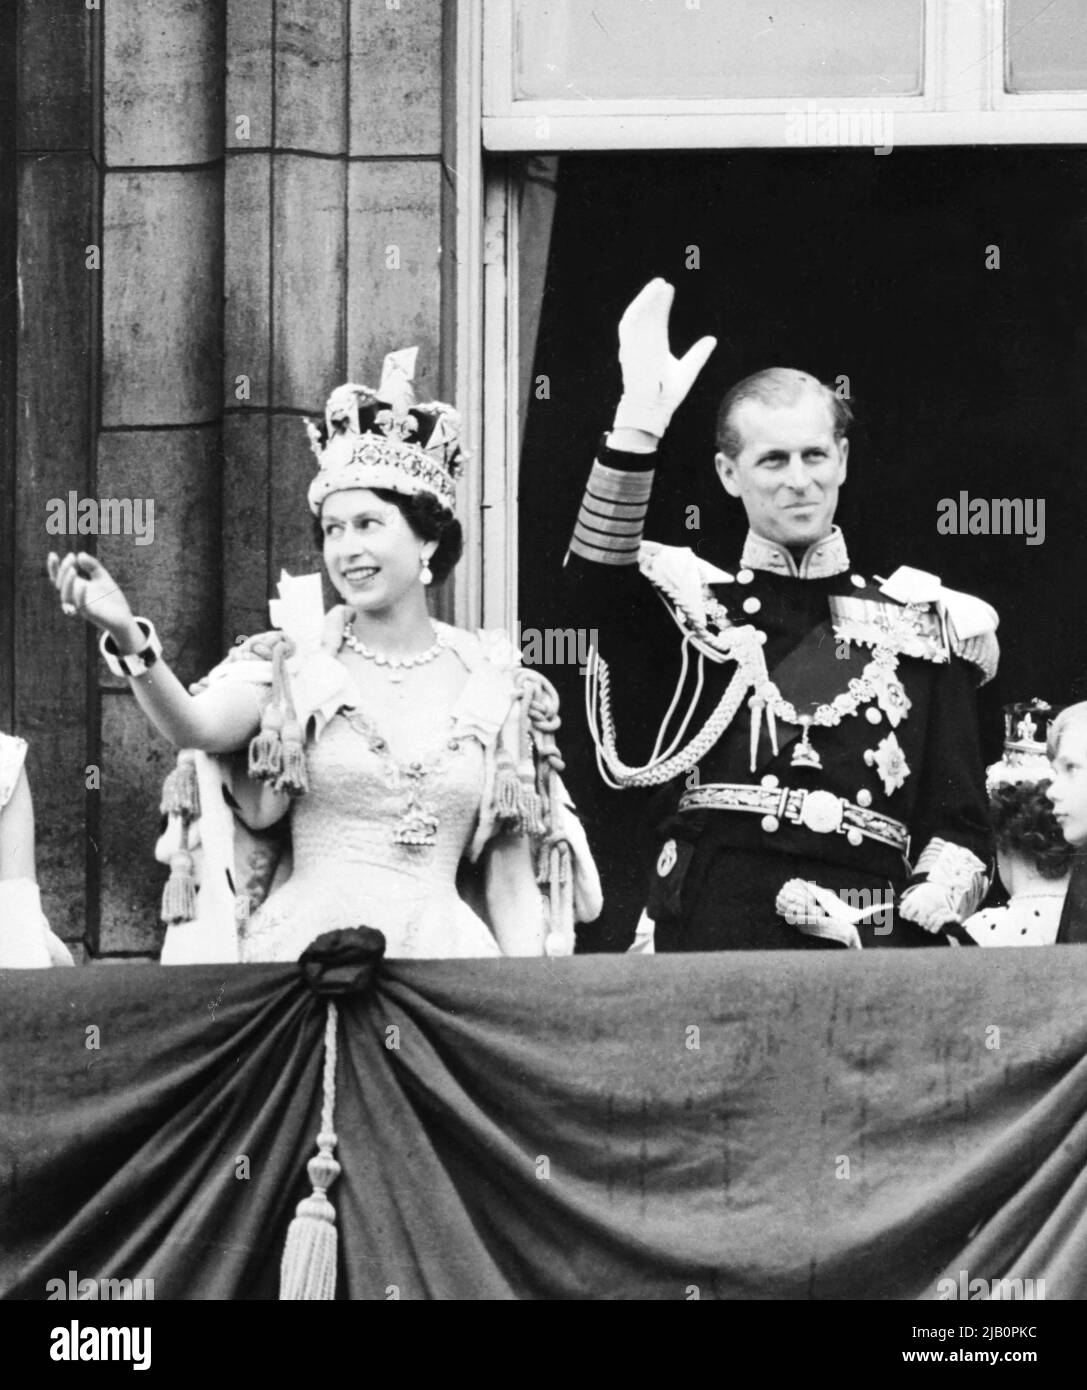 Britain's Queen Elizabeth II (L) accompanied by Britain's Prince Philip, Duke of Edinburgh (R) waves to the crowd, June 2, 1953 after being crowned  at Westminter Abbey in London. - Elizabeth married the Duke of Edinburgh on the 20th of November 1947 and was proclaimed Queen in 1952 at age 25. Her coronation was the first worldwide televised event Stock Photo